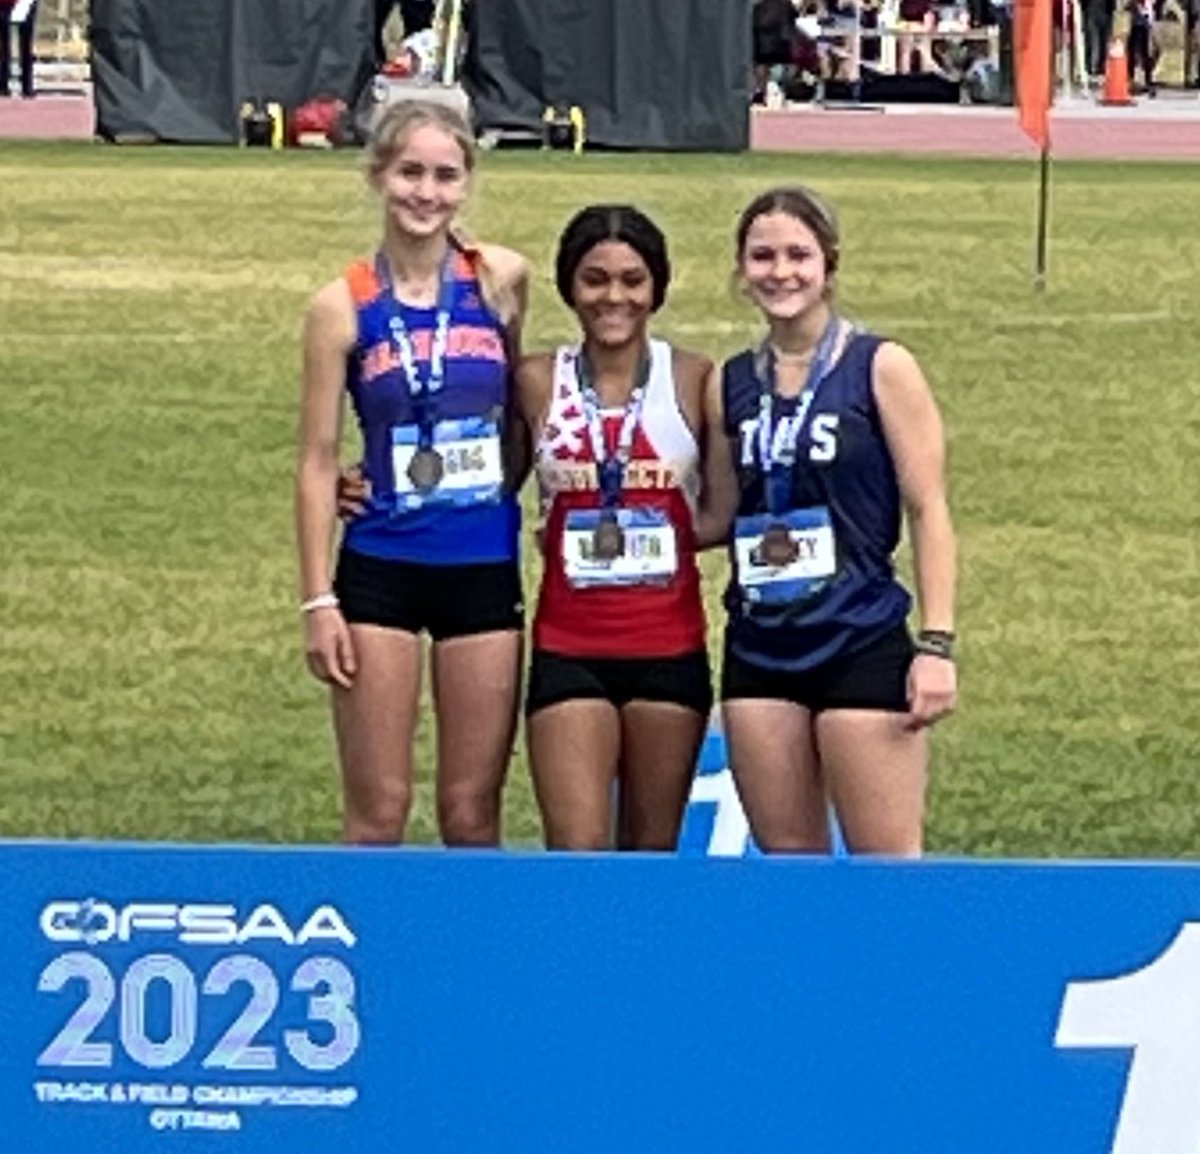 After the first two days of competition at the OFSAA Track and Field meet in Ottawa, the Sabres have had a number of top 8 finishes with some medals in the mix! Tomorrow is the final day of competition! Goooo, Sabres!